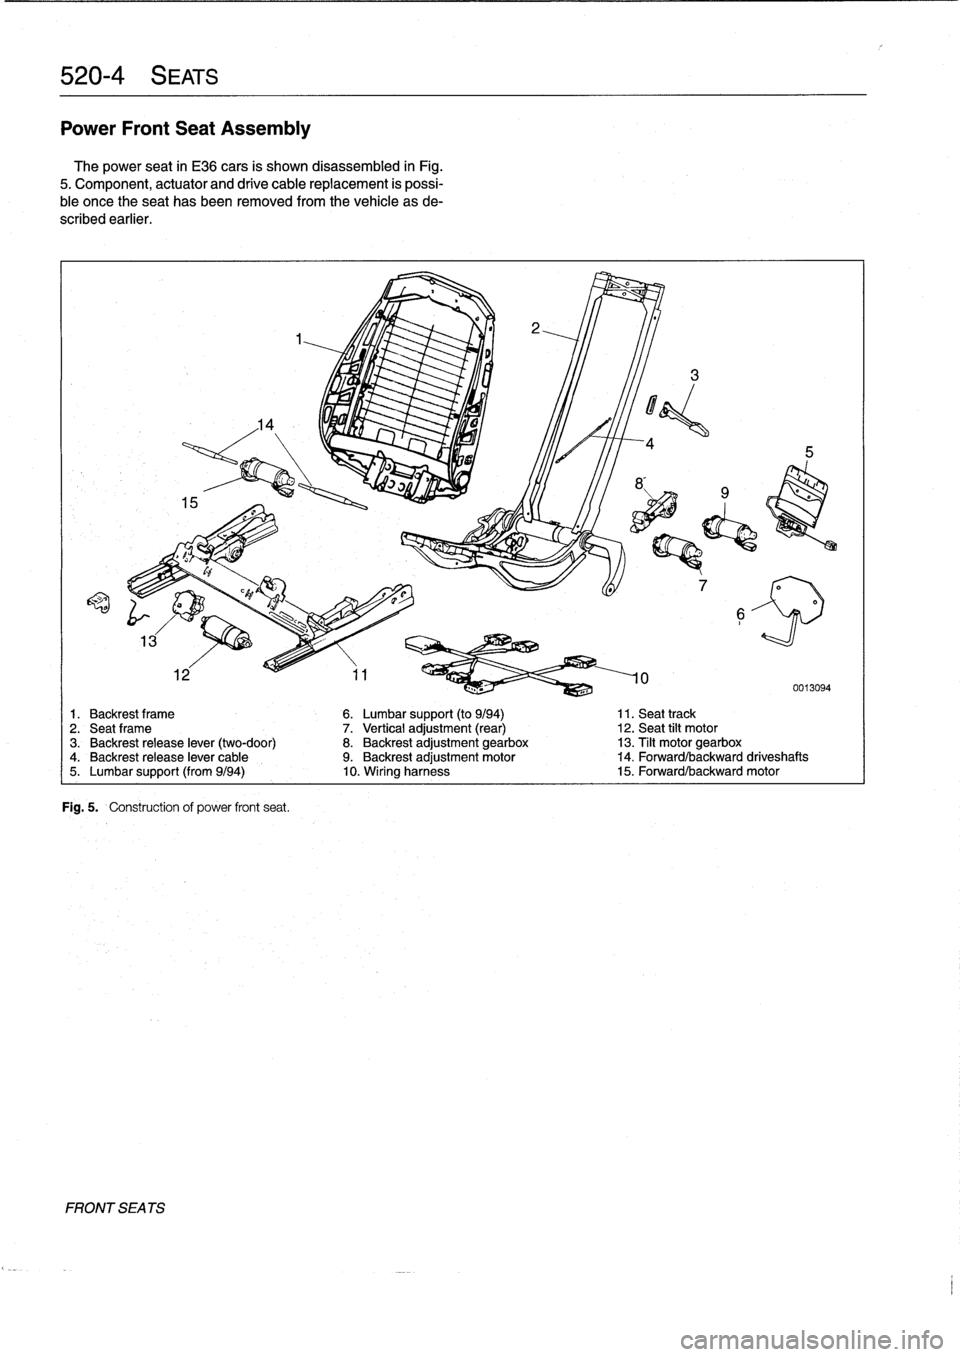 BMW 328i 1993 E36 Workshop Manual 
520-
4
SEATS

Power
Front
Seat
Assembly
The
power
seat
in
E36
cars
is
shown
disassembled
in
Fig
.

5
.
Component,
actuator
and
drive
cable
replacement
is
possi-
ble
once
theseat
has
been
removed
from